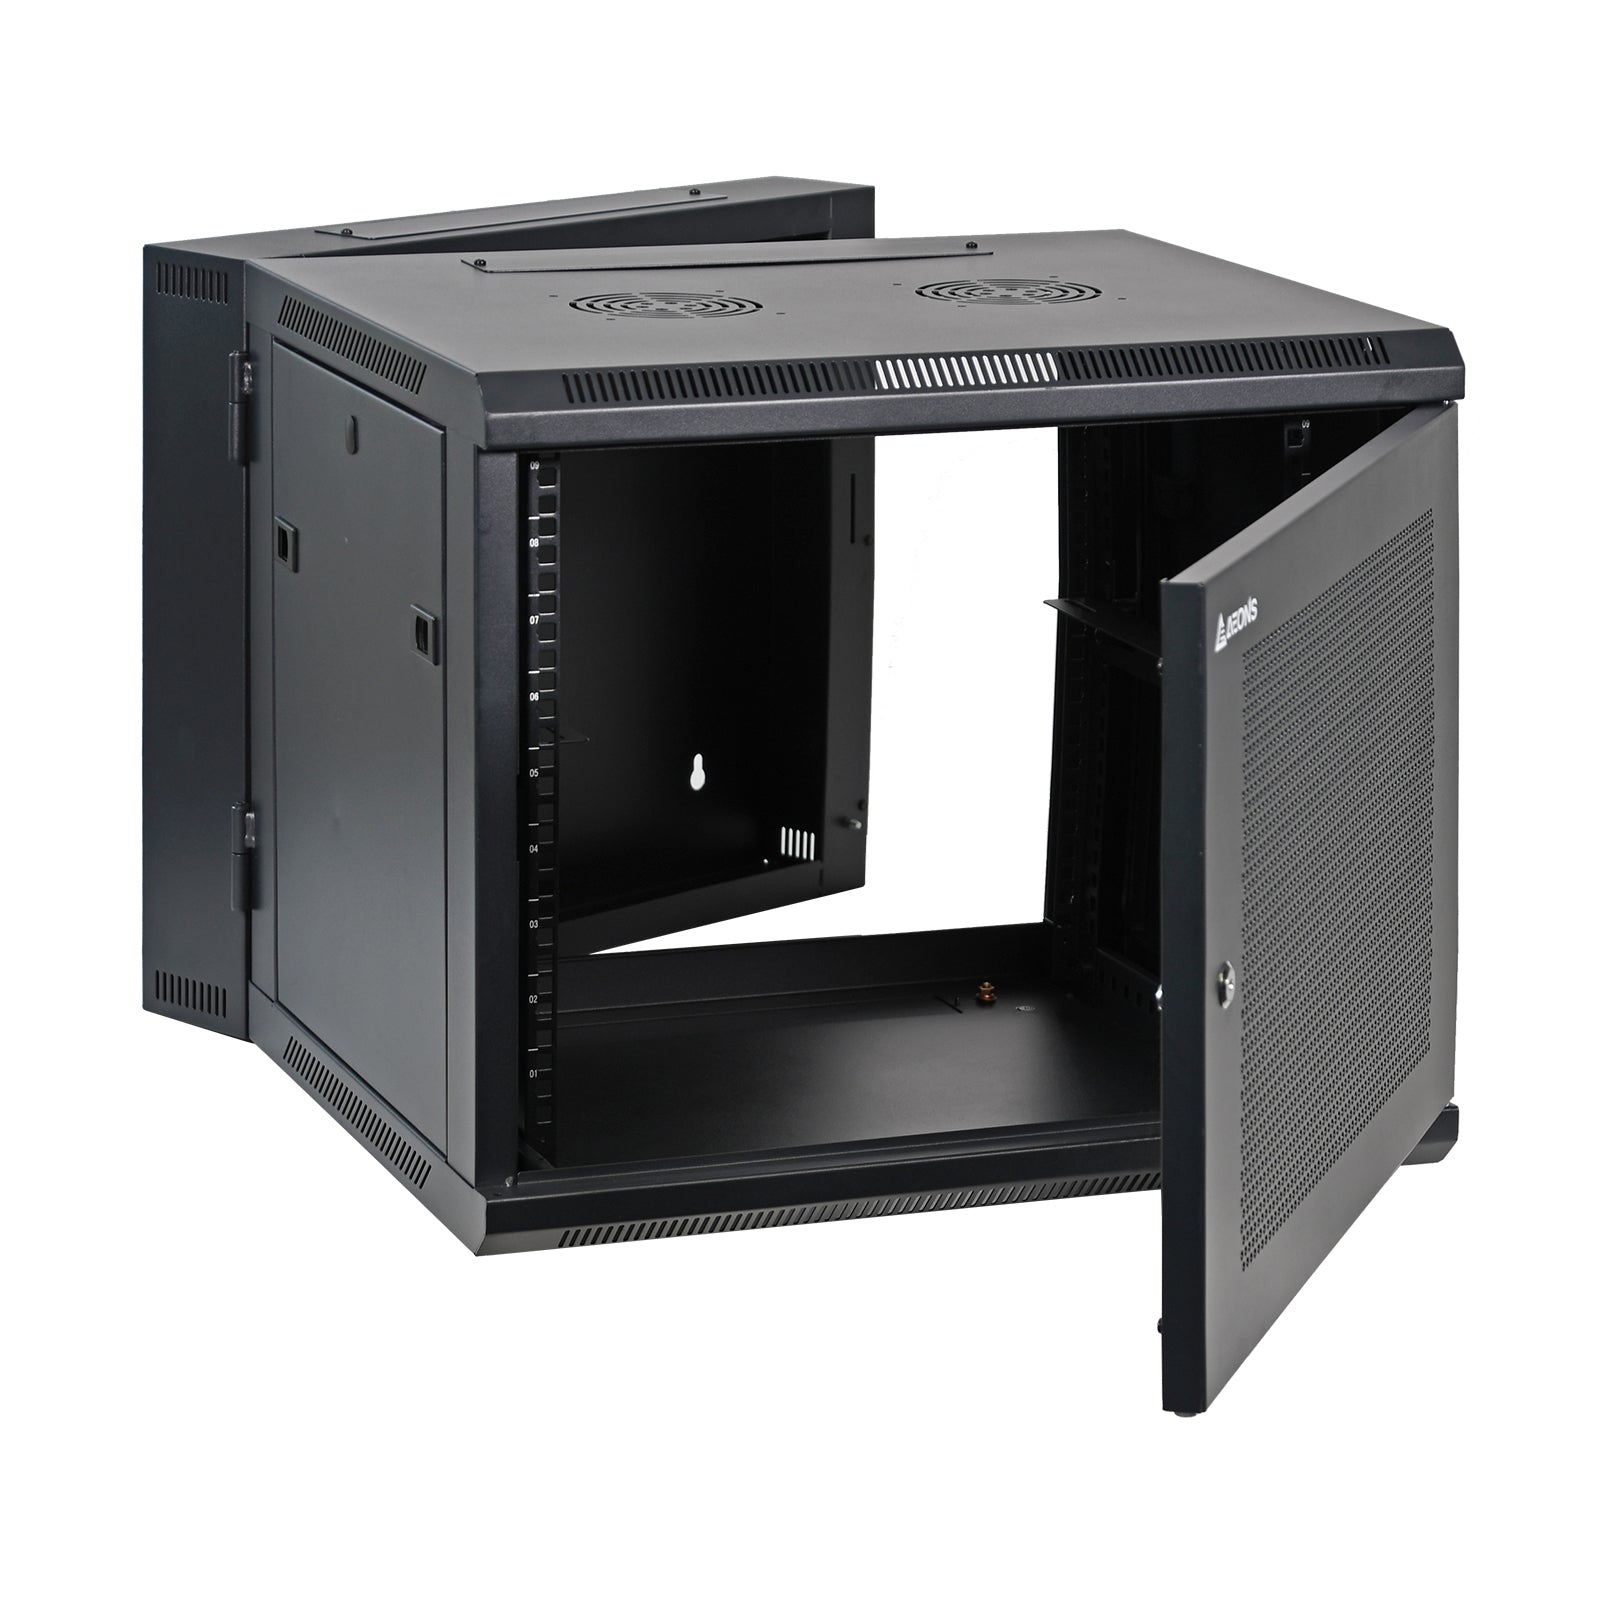 Aeons SB Seires 9U Wall-Mount Network Cabinet, Hinged Swing-Out, Mid-Depth, Vented Door